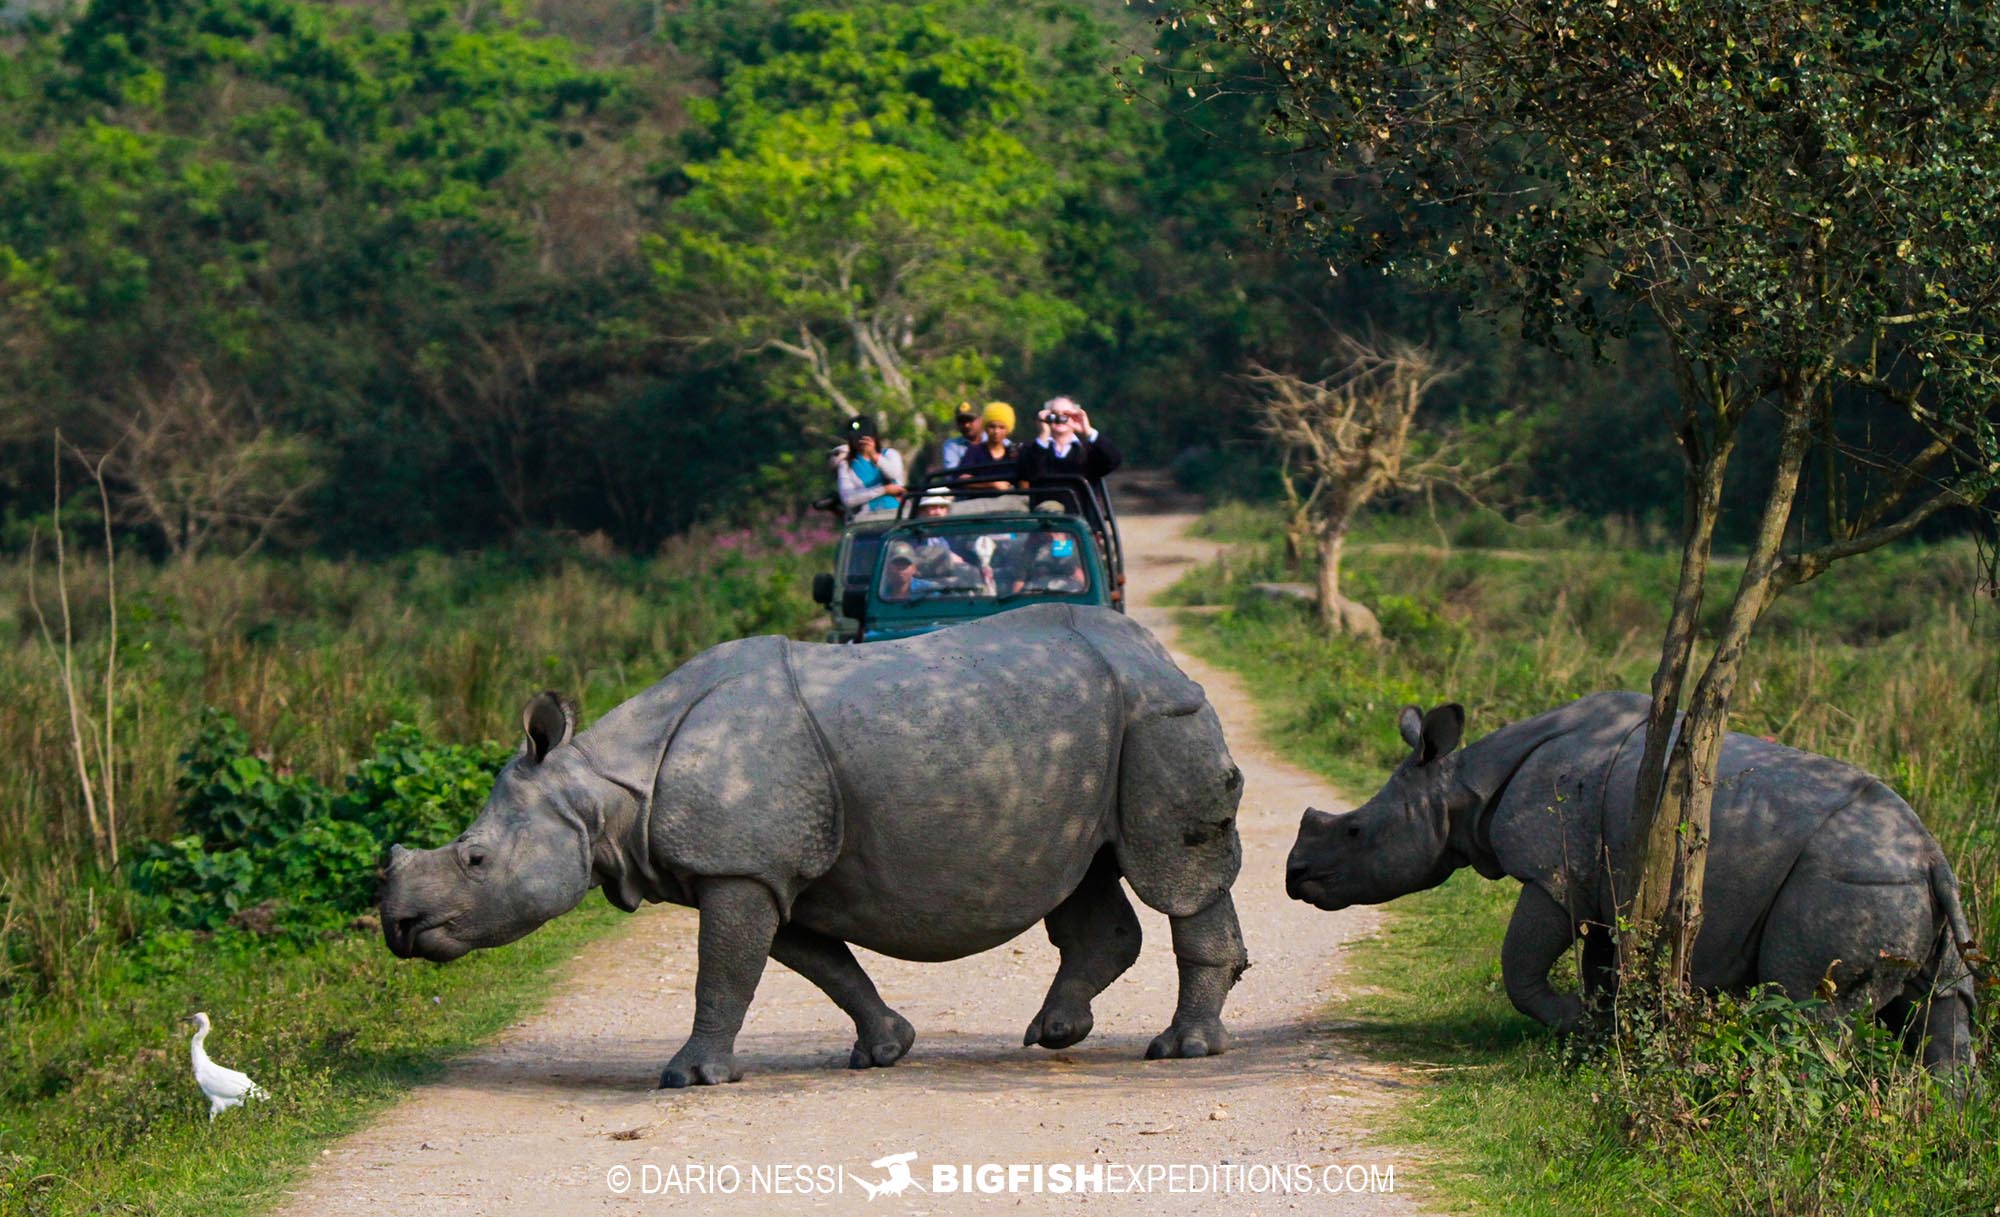 One horned rhinoceros photography tour on a tiger trip in Kaziranga National Park, India.